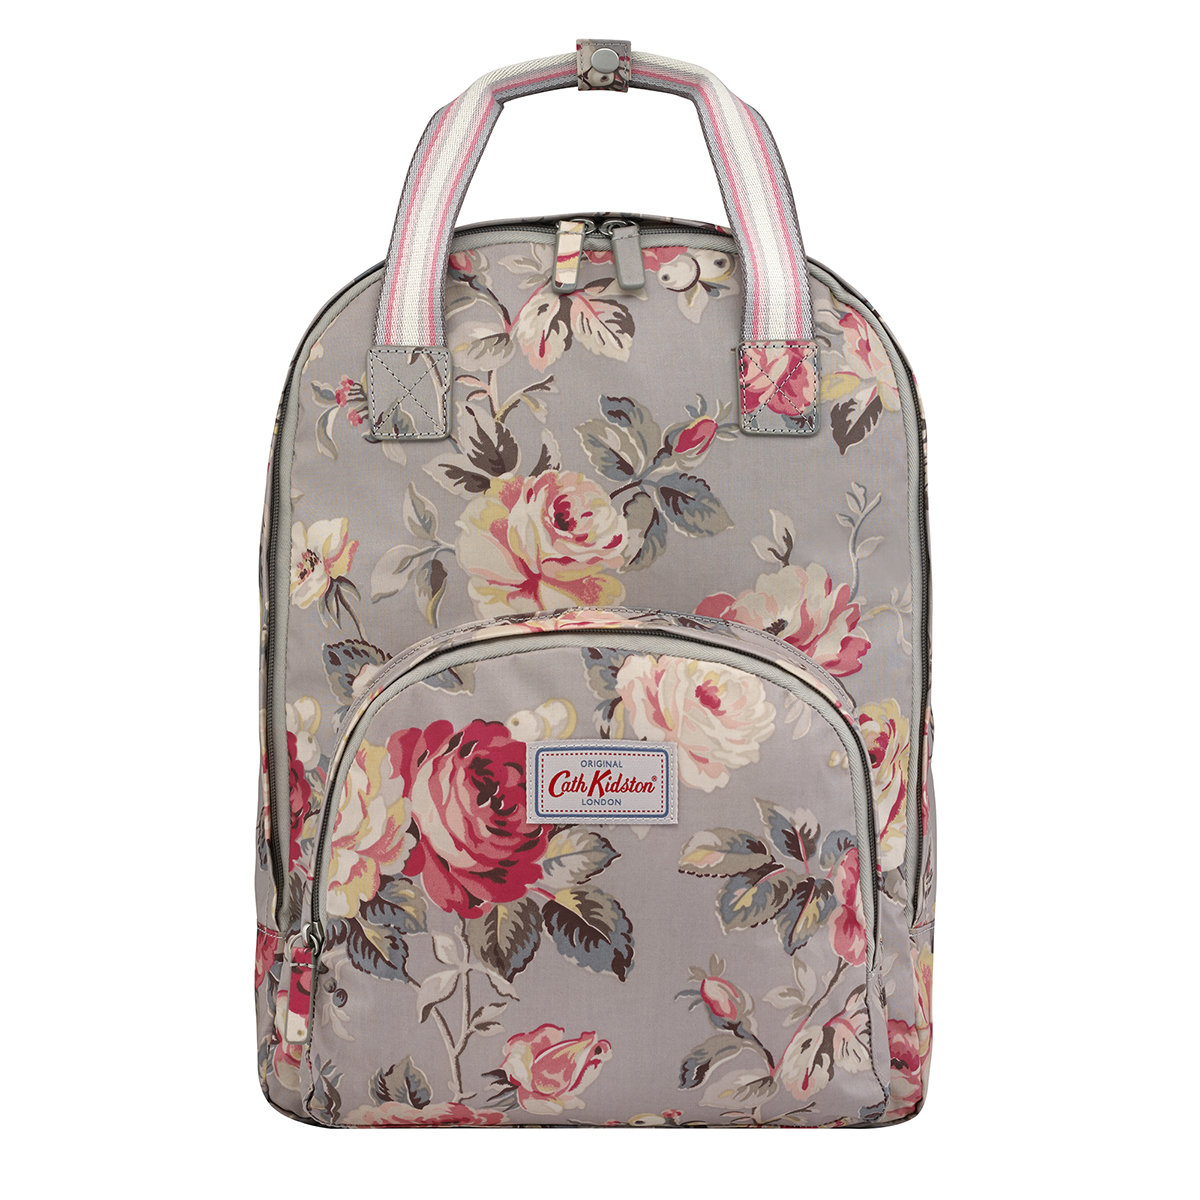 Cath Kidston Brightening your day since 